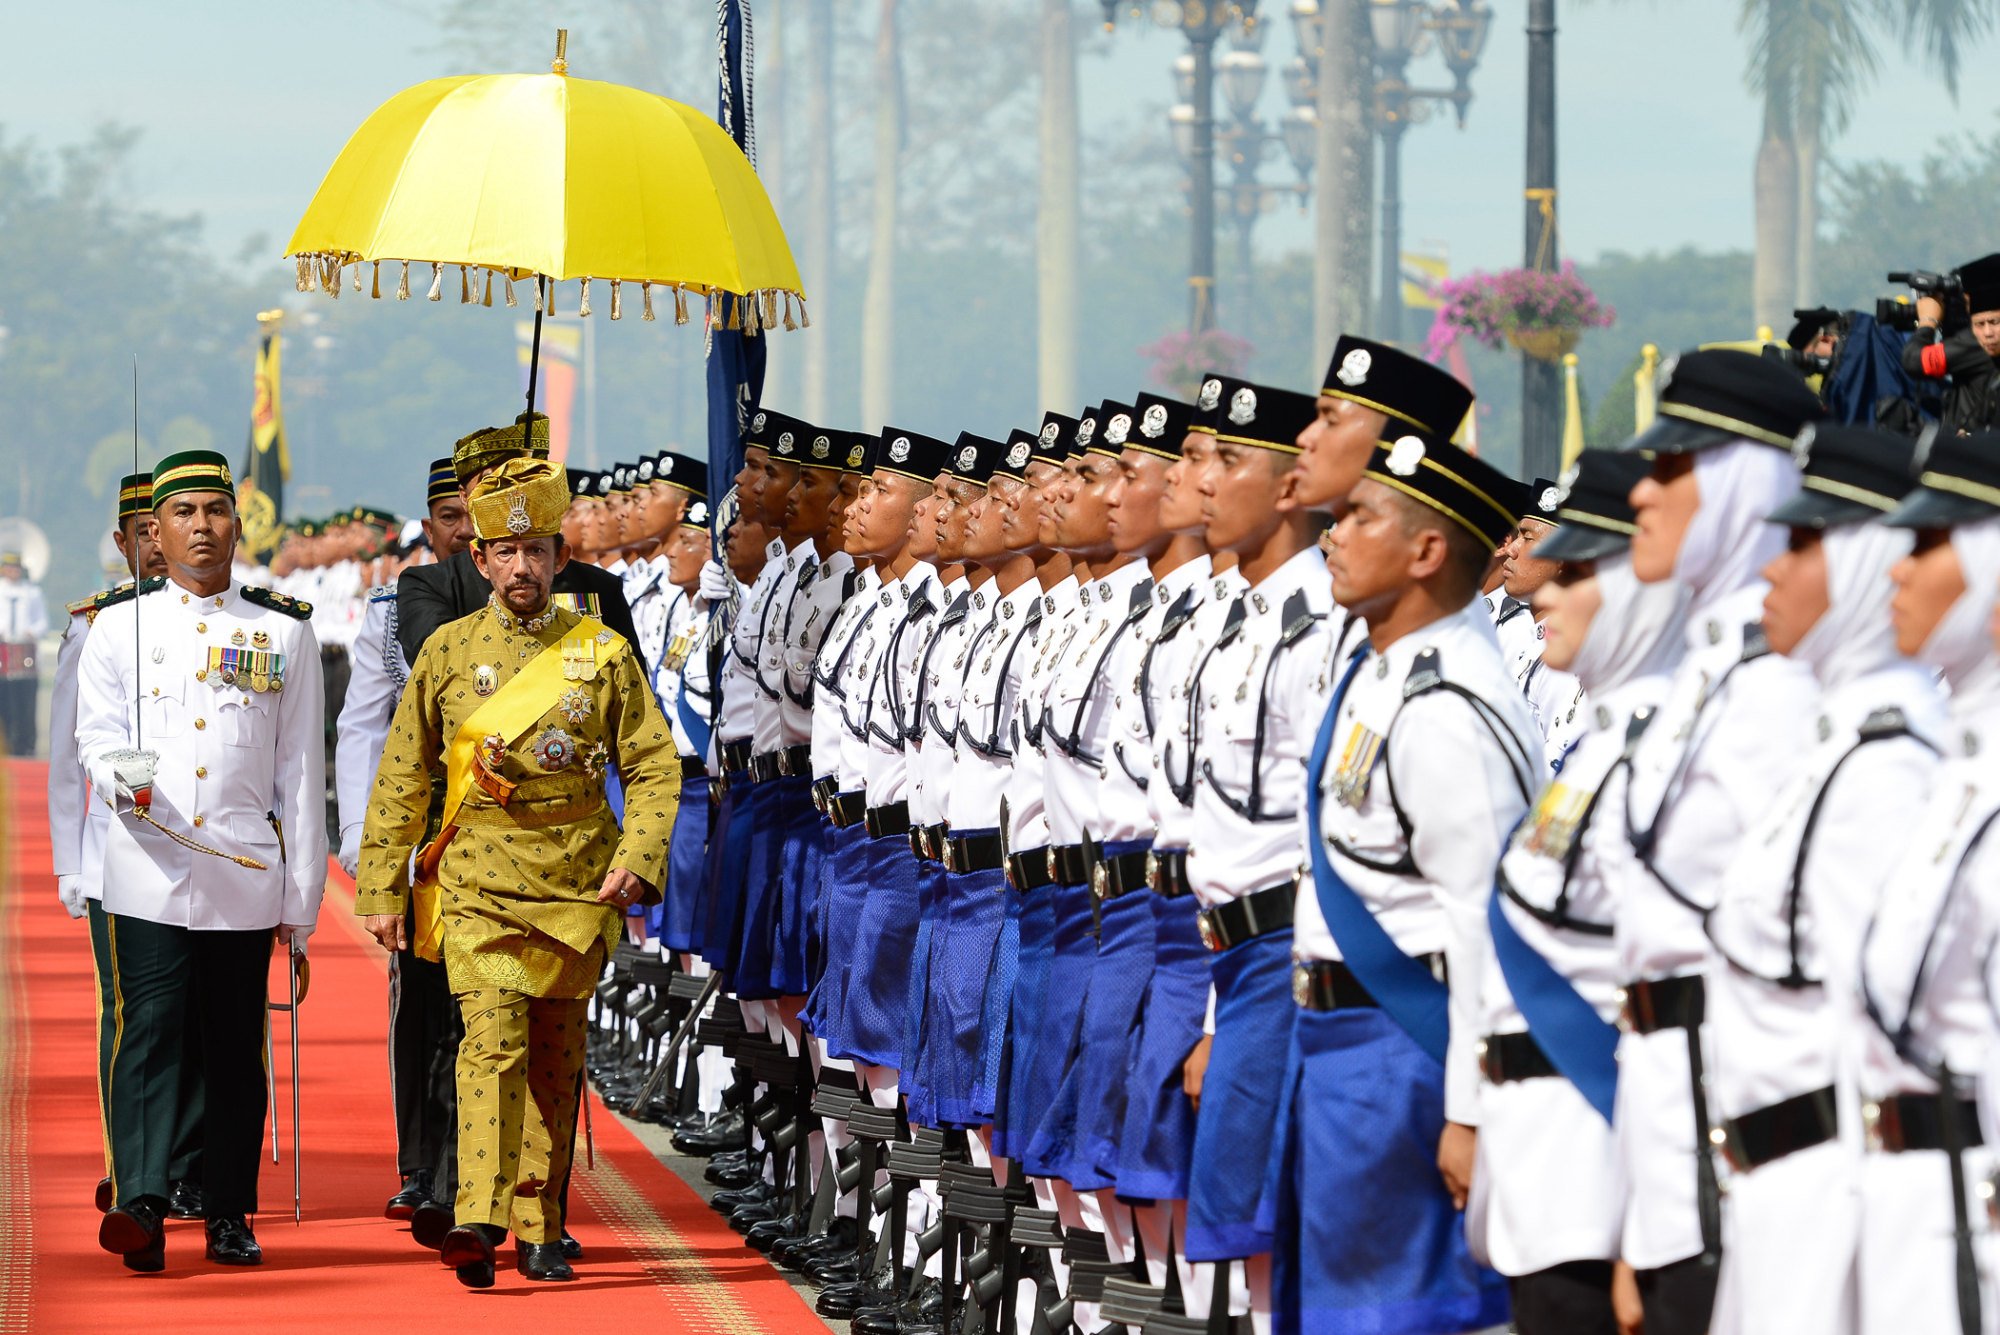 Sultan Haji Hassanal Bolkiah (front, left) inspects a guard of honour at Brunei’s royal palace in 2017. The average Bruneian man is 165cm tall. Photo: Xinhua